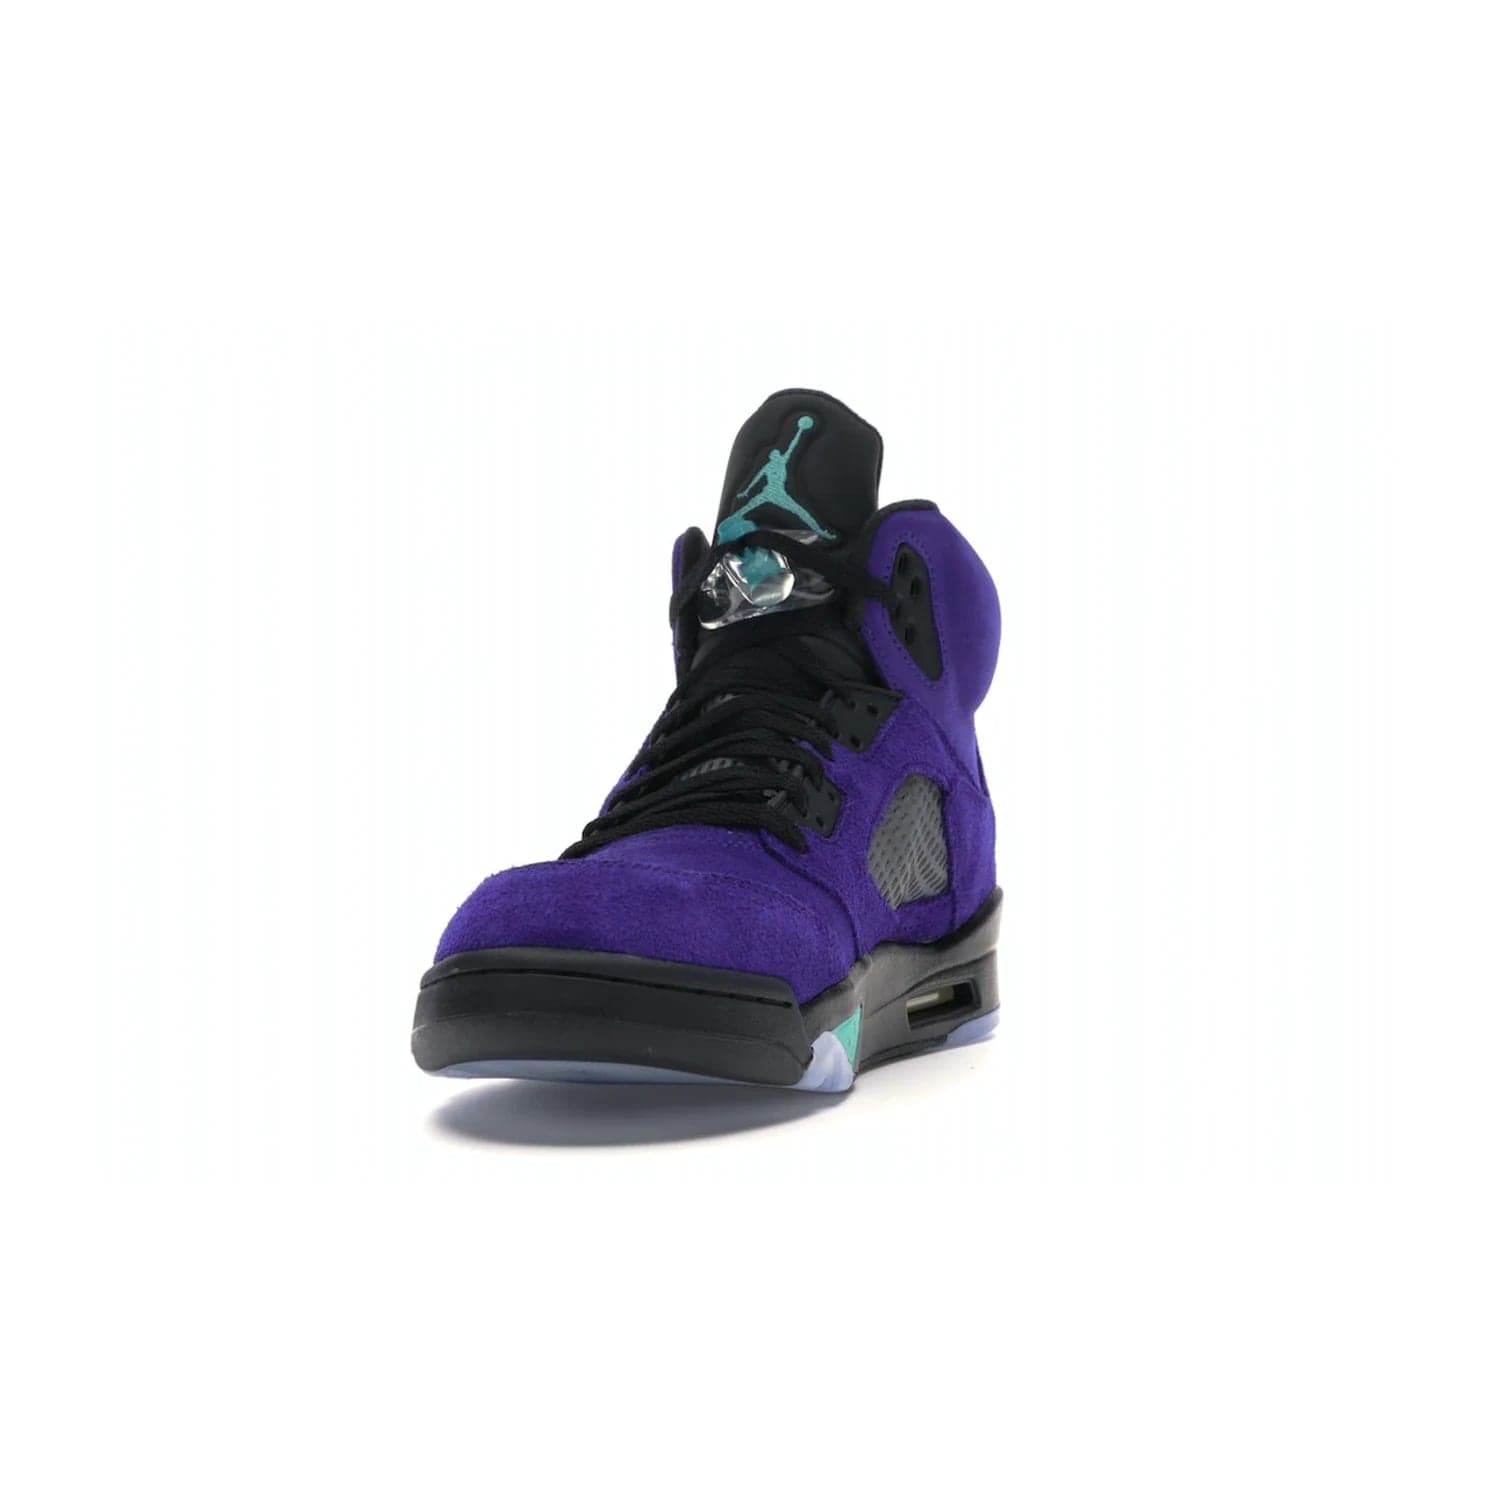 Jordan 5 Retro Alternate Grape - Image 12 - Only at www.BallersClubKickz.com - Bring the classic Jordan 5 Retro Alternate Grape to your sneaker collection! Featuring a purple suede upper, charcoal underlays, green detailing, and an icy and green outsole. Releasing for the first time since 1990, don't miss this chance to add a piece of sneaker history to your collection.